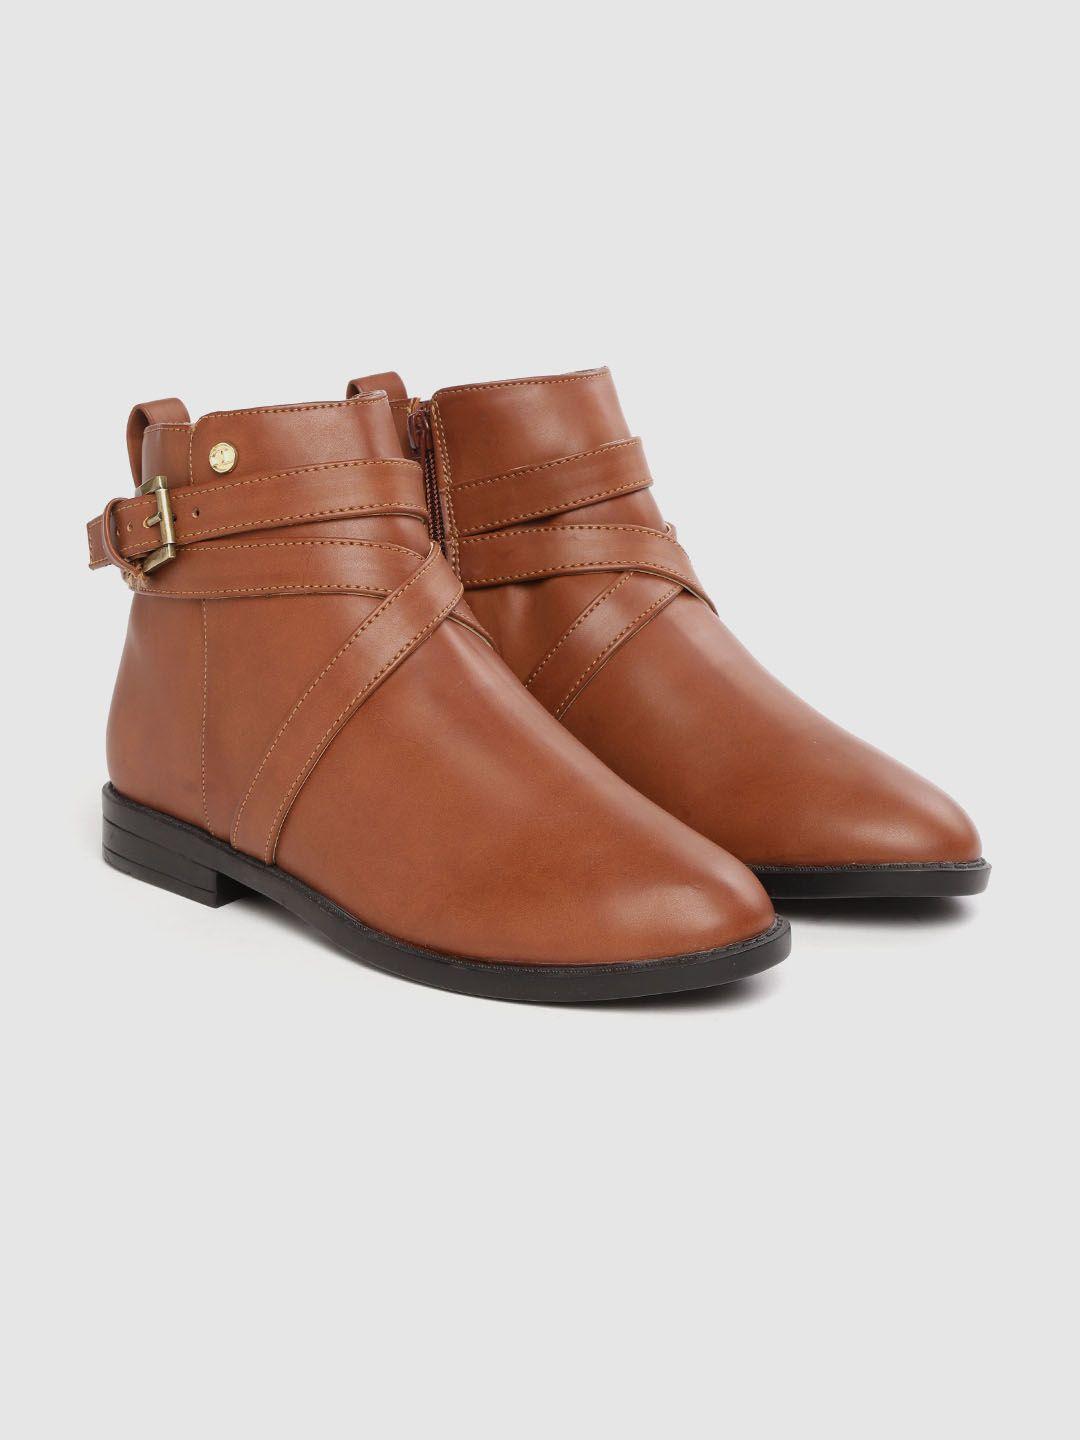 carlton-london-women-tan-brown-solid-mid-top-flat-boots-with-buckle-detail